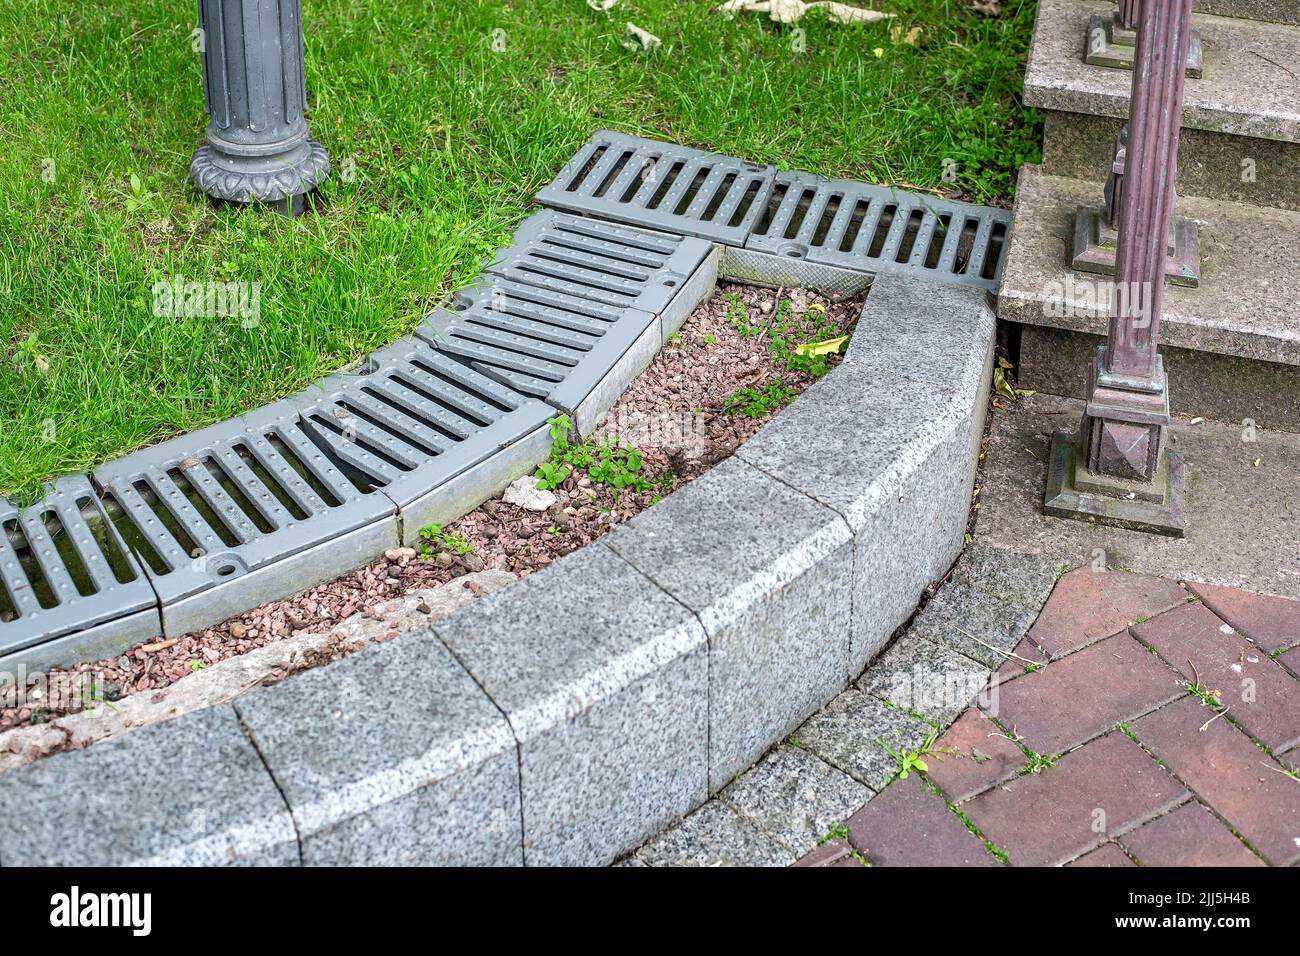 iron drainage grate on the roadside with green grass and stone pebbles at the granite curb along the pedestrian pavement of stone tiles near stairs wi Stock Photo